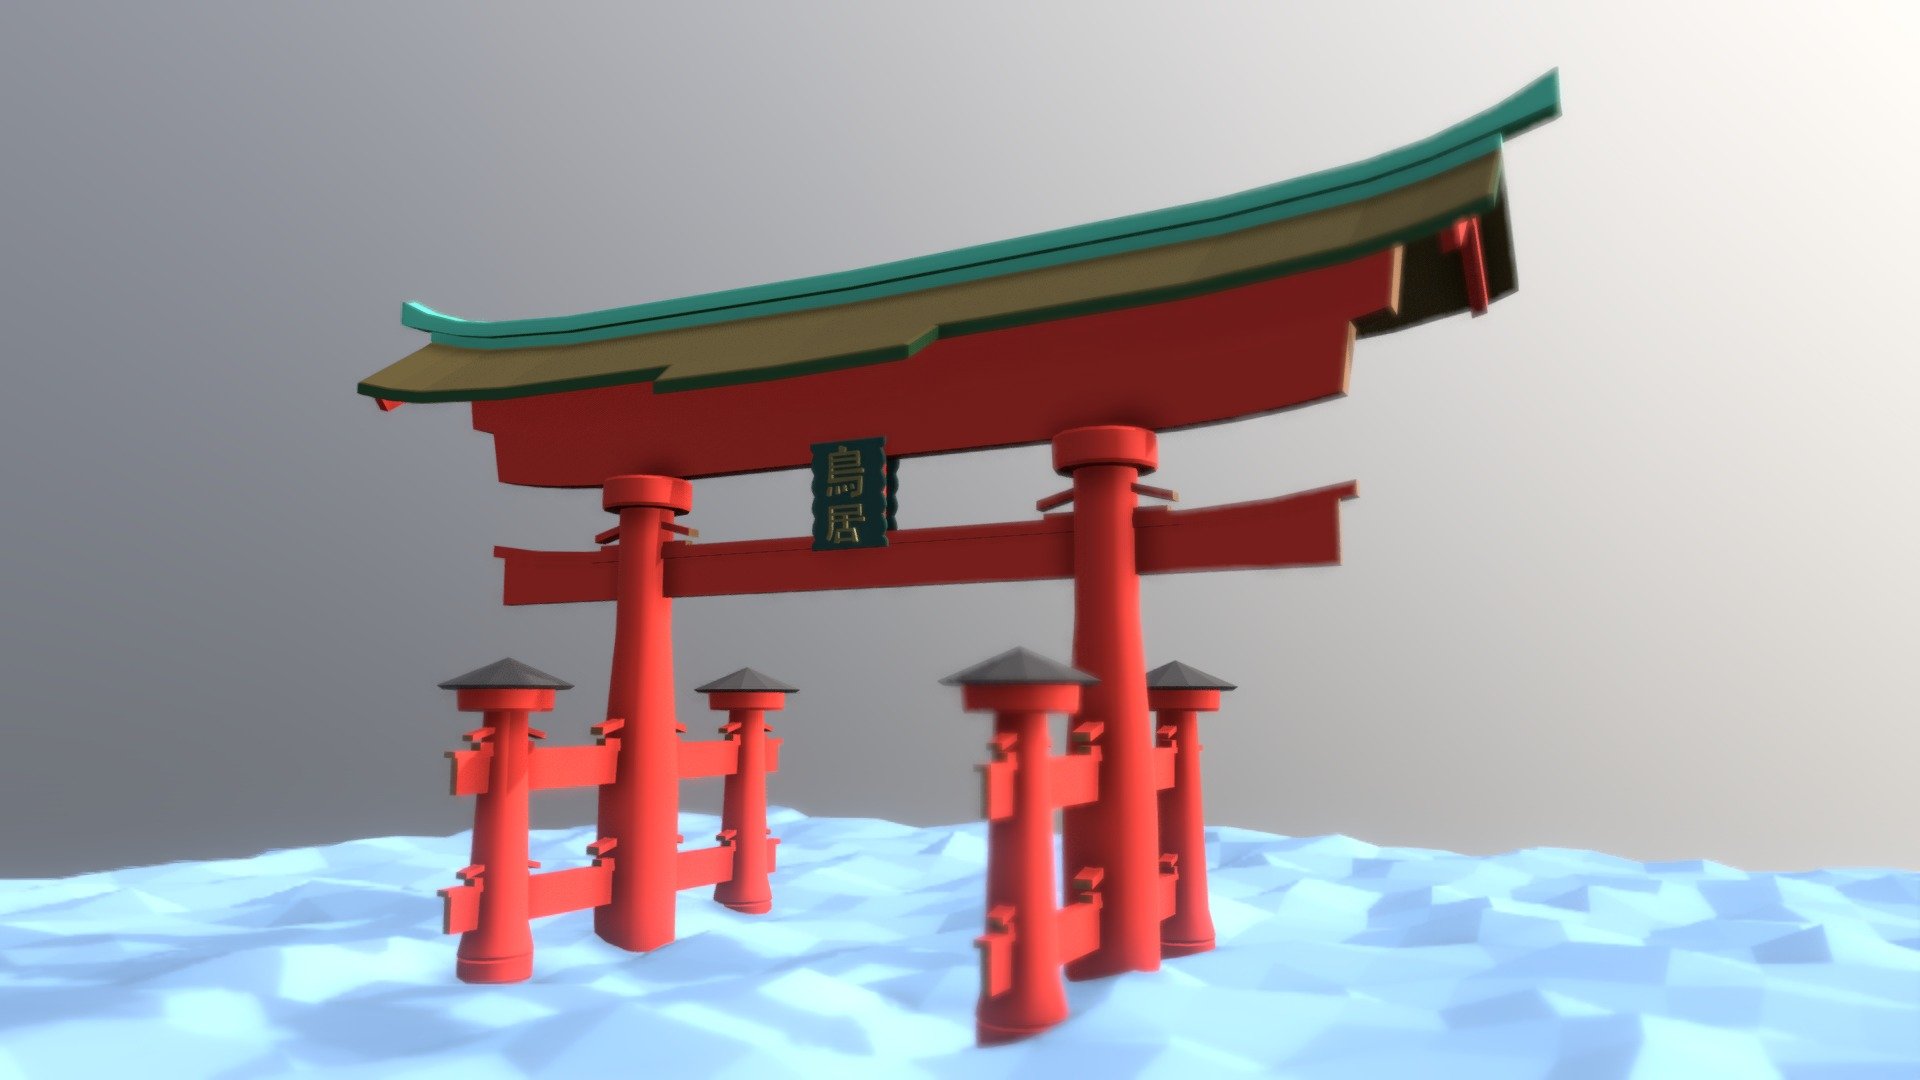 A lowpoly model of a traditional Japanese torii gate, based on the Ryobu-style floating torii at Itsukushima Shrine.

Modeled with Blender 3d model